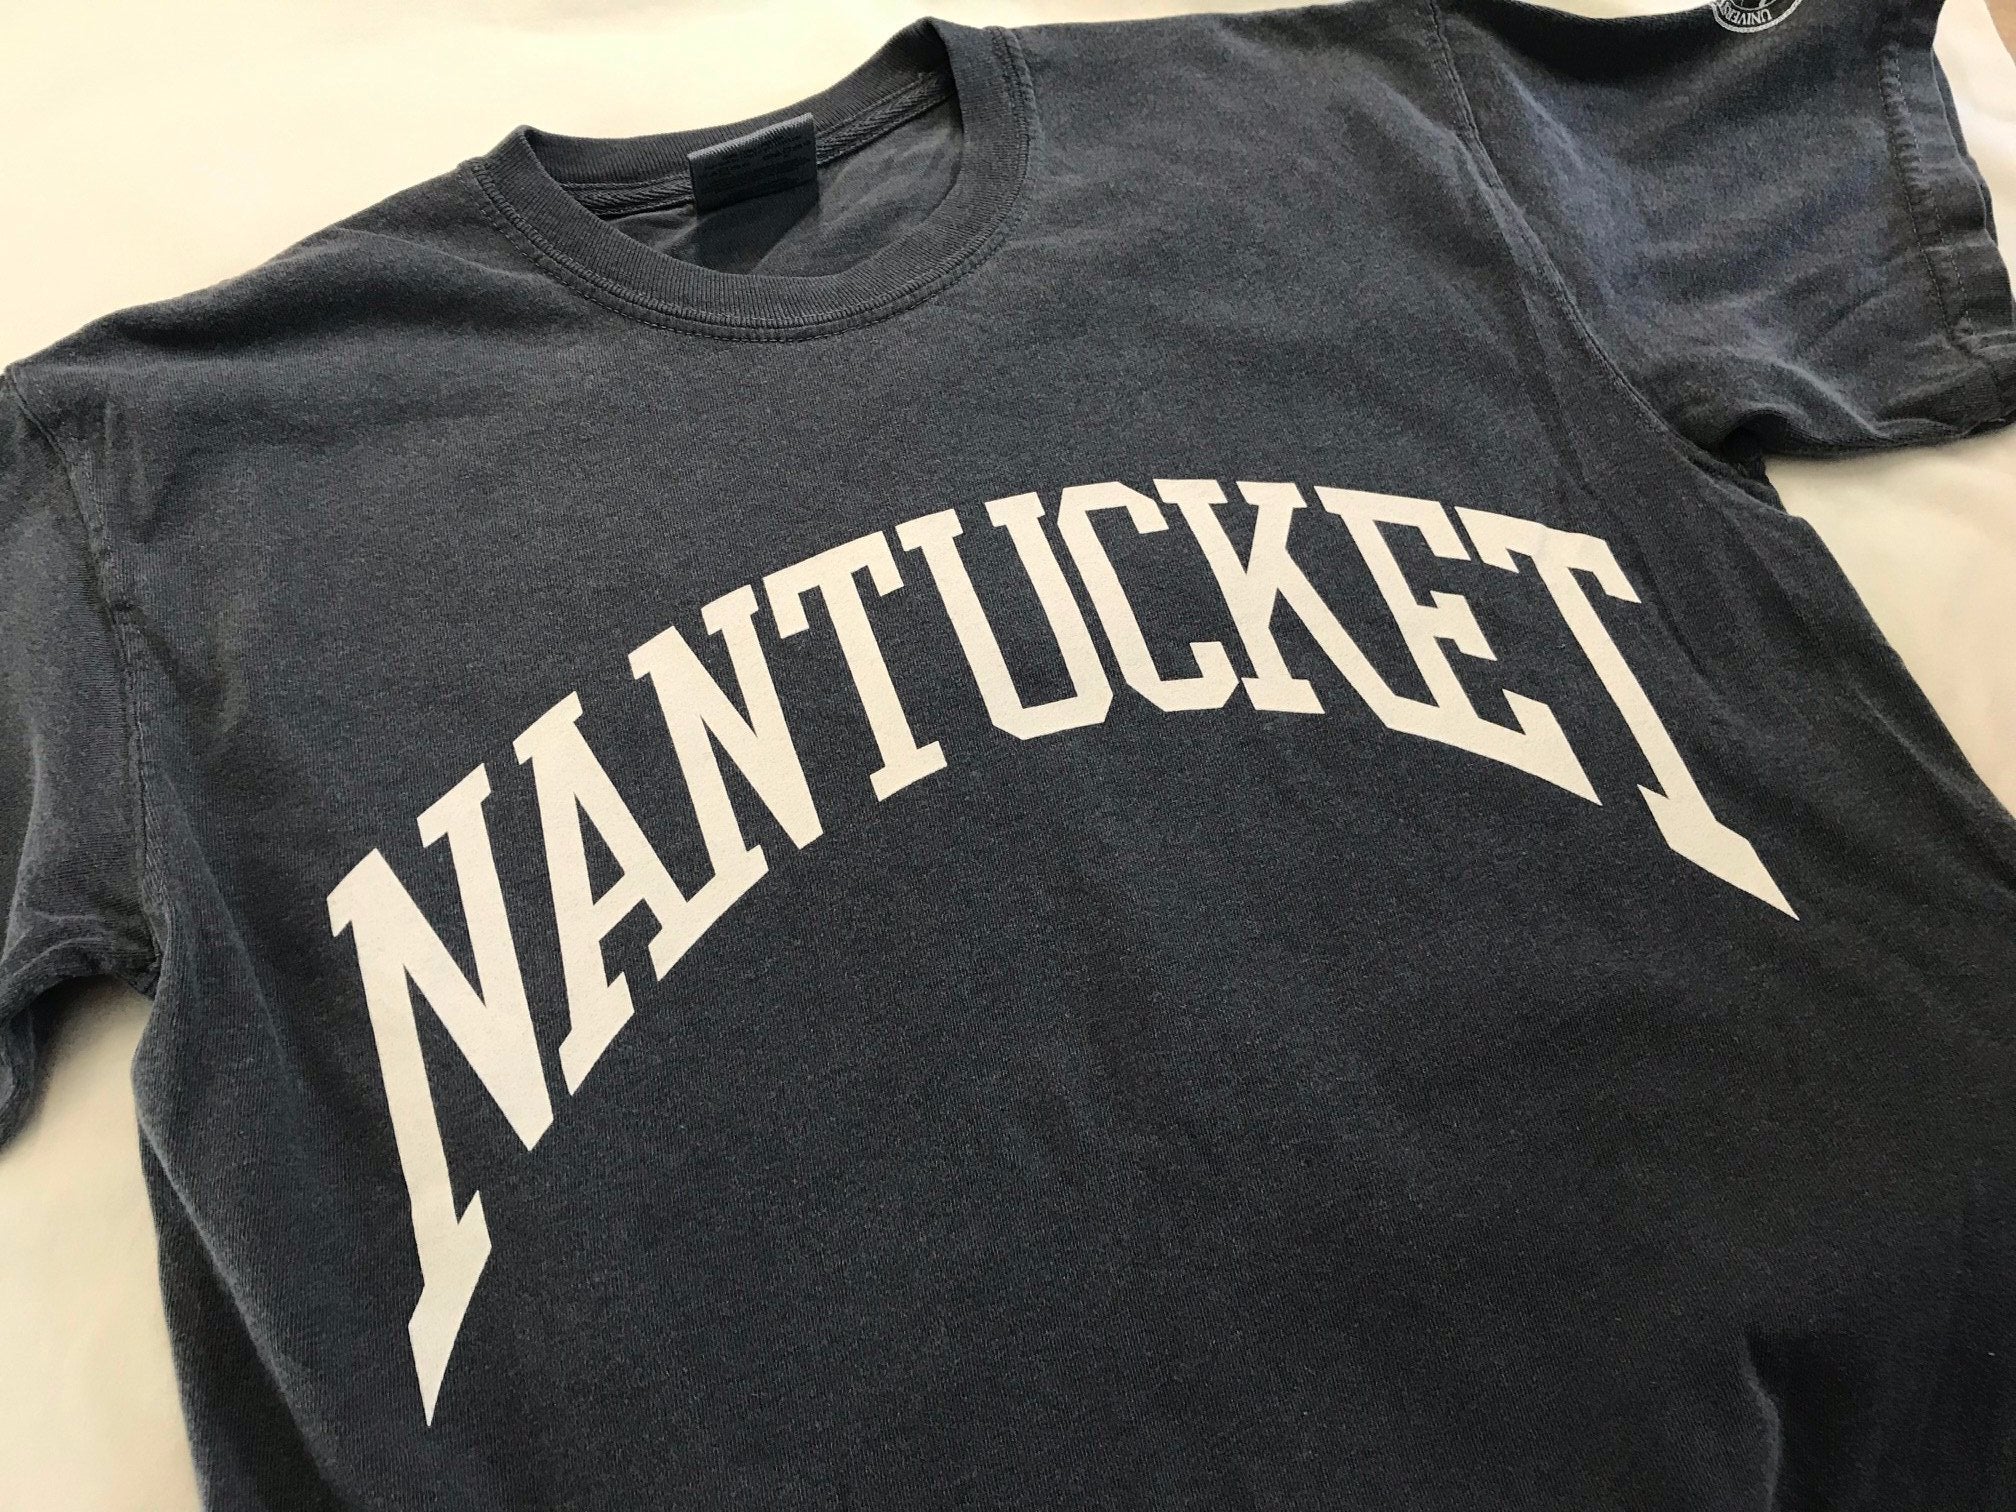 Nantucket Arch tee by Comfort Colors in Periwinkle Blue